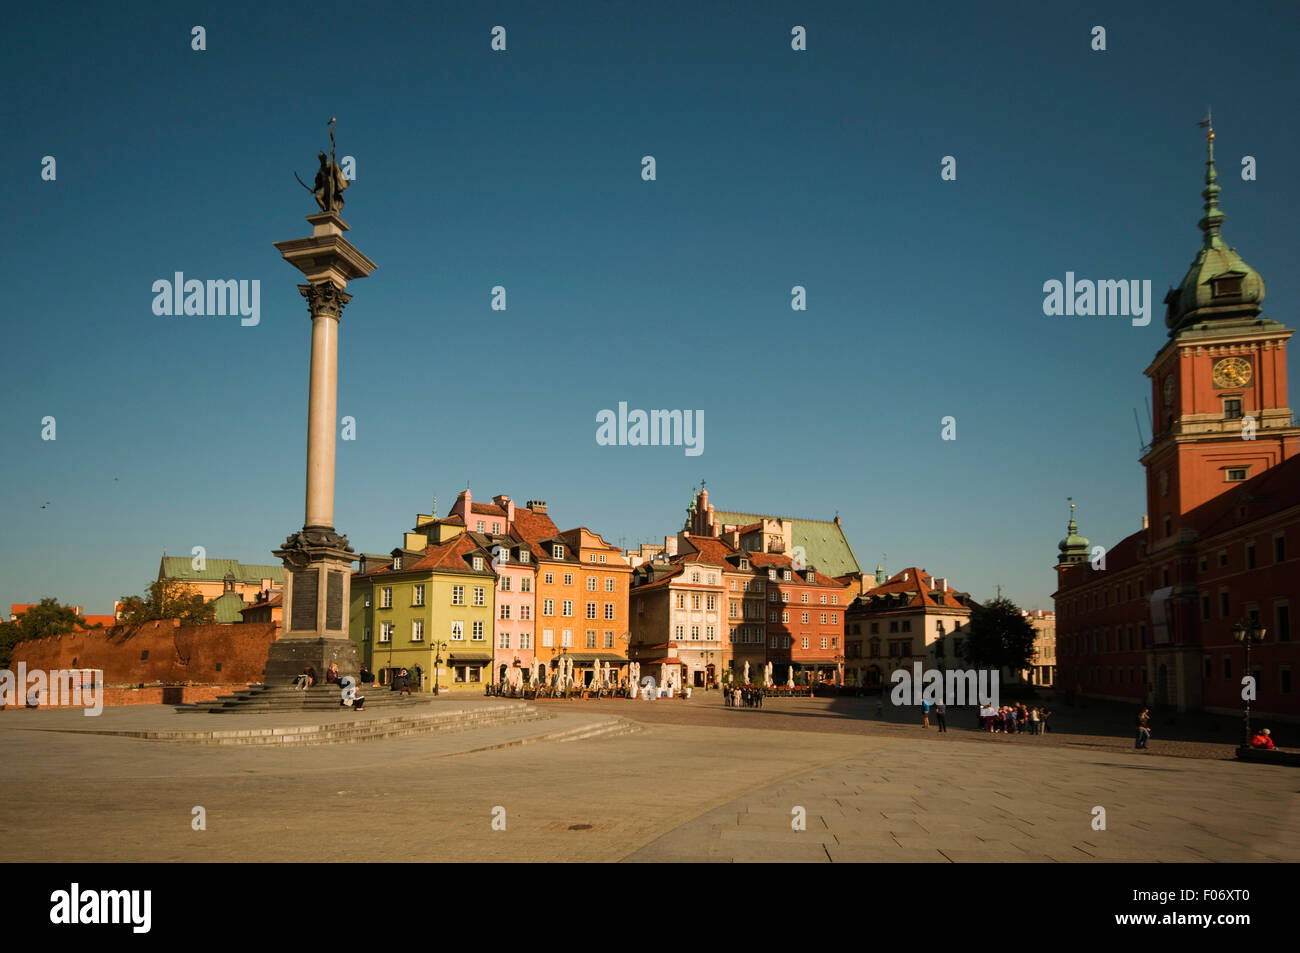 EUROPE, POLAND, Warsaw, Old Town (Stare Miasto), Castle Square (Plac Zamkowy),  next to  the Royal Castle with King Sigismund II Stock Photo